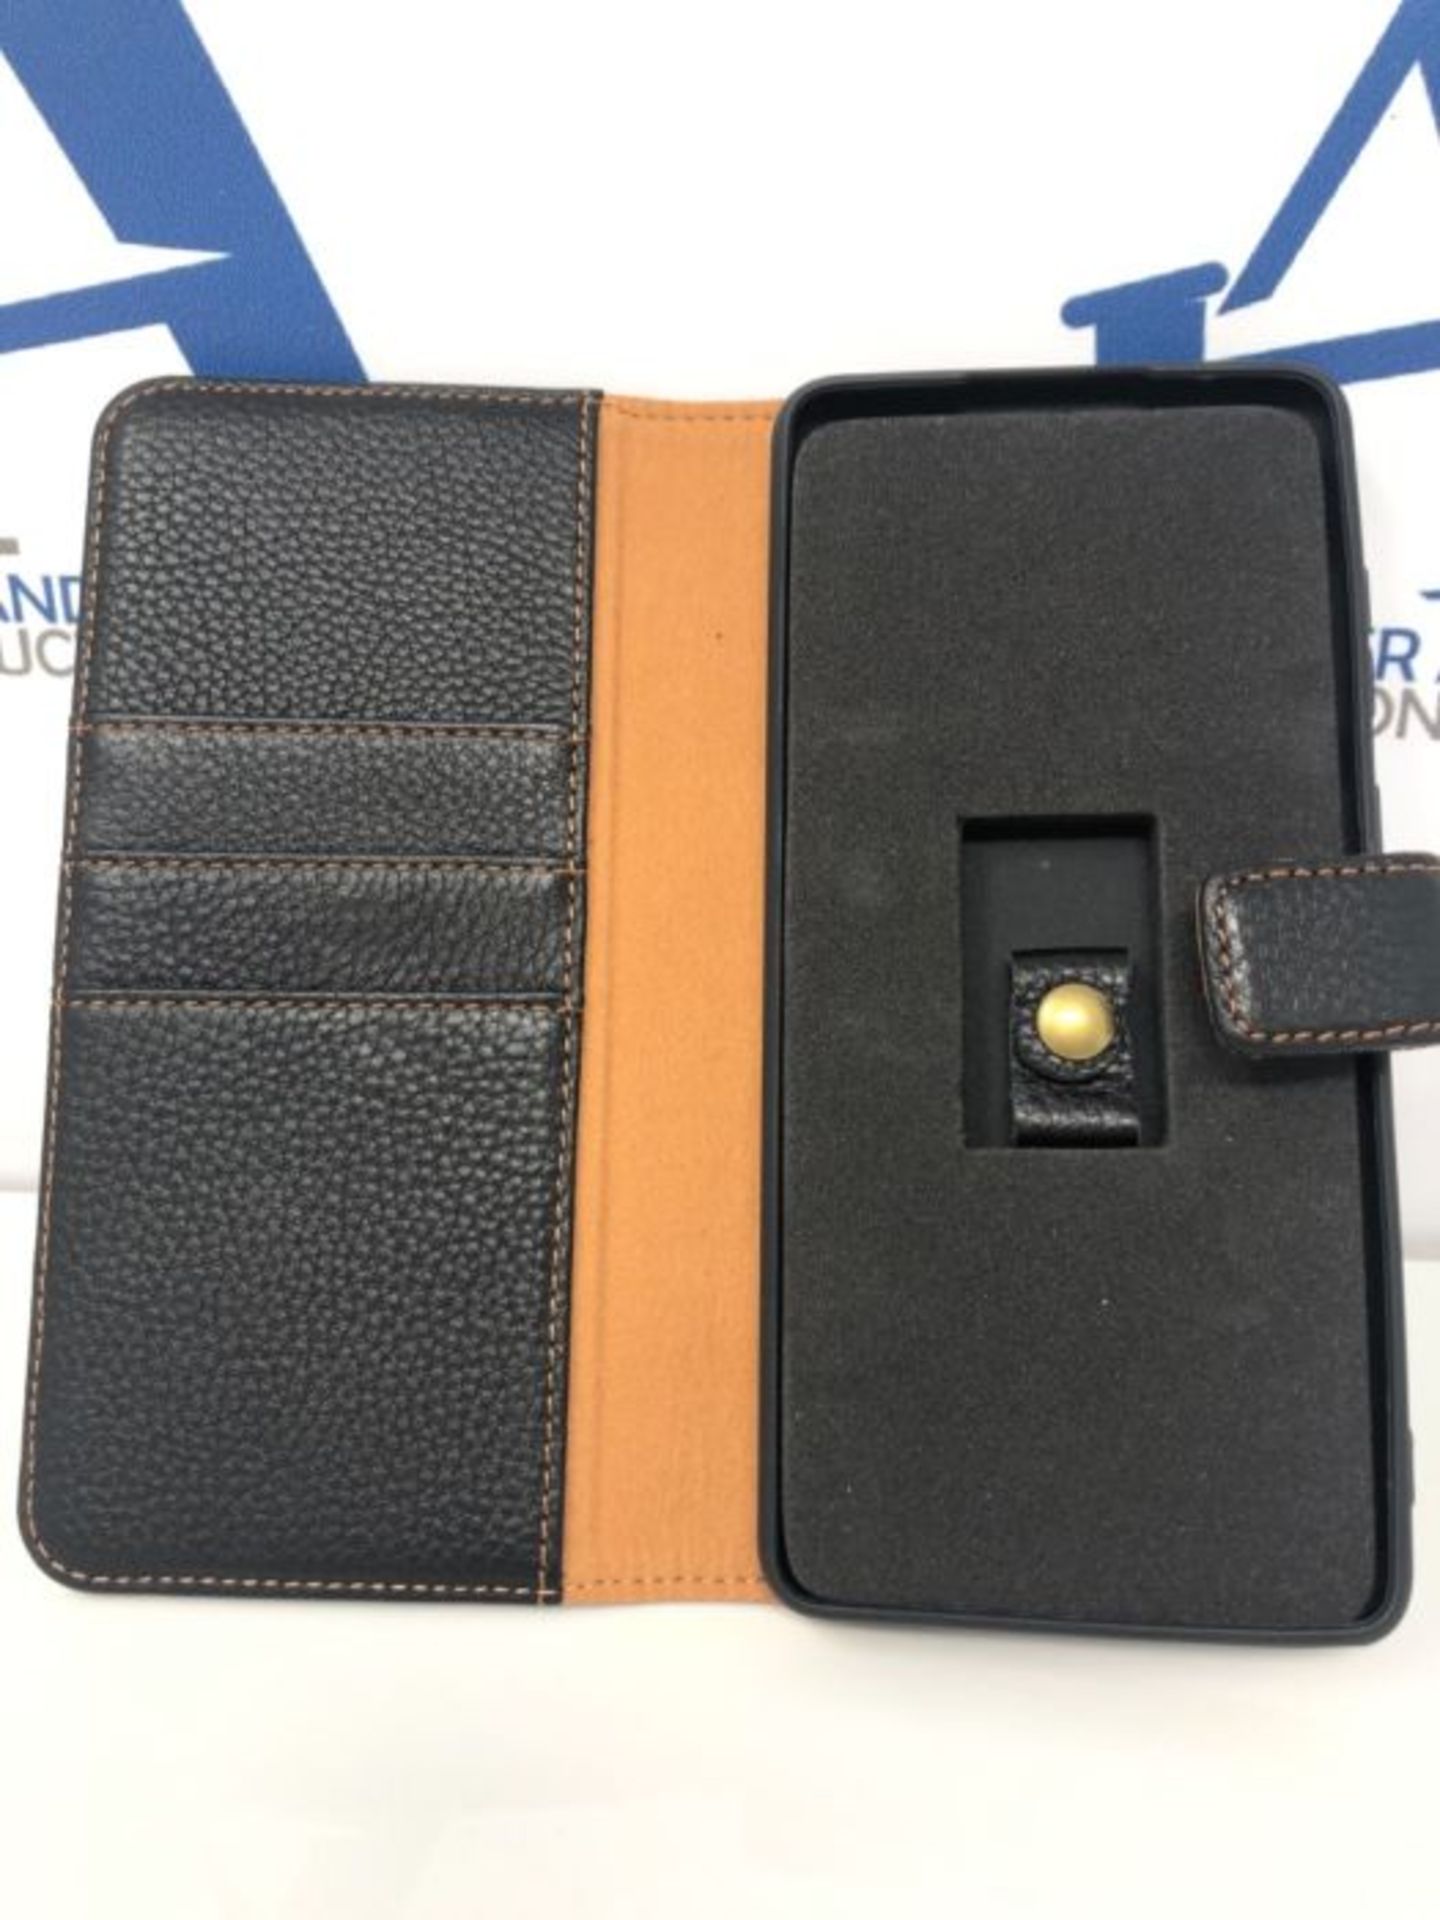 LENSUN Samsung Galaxy Note 10 Lite Leather Case, Flip Genuine Leather Wallet Phone Cas - Image 3 of 3